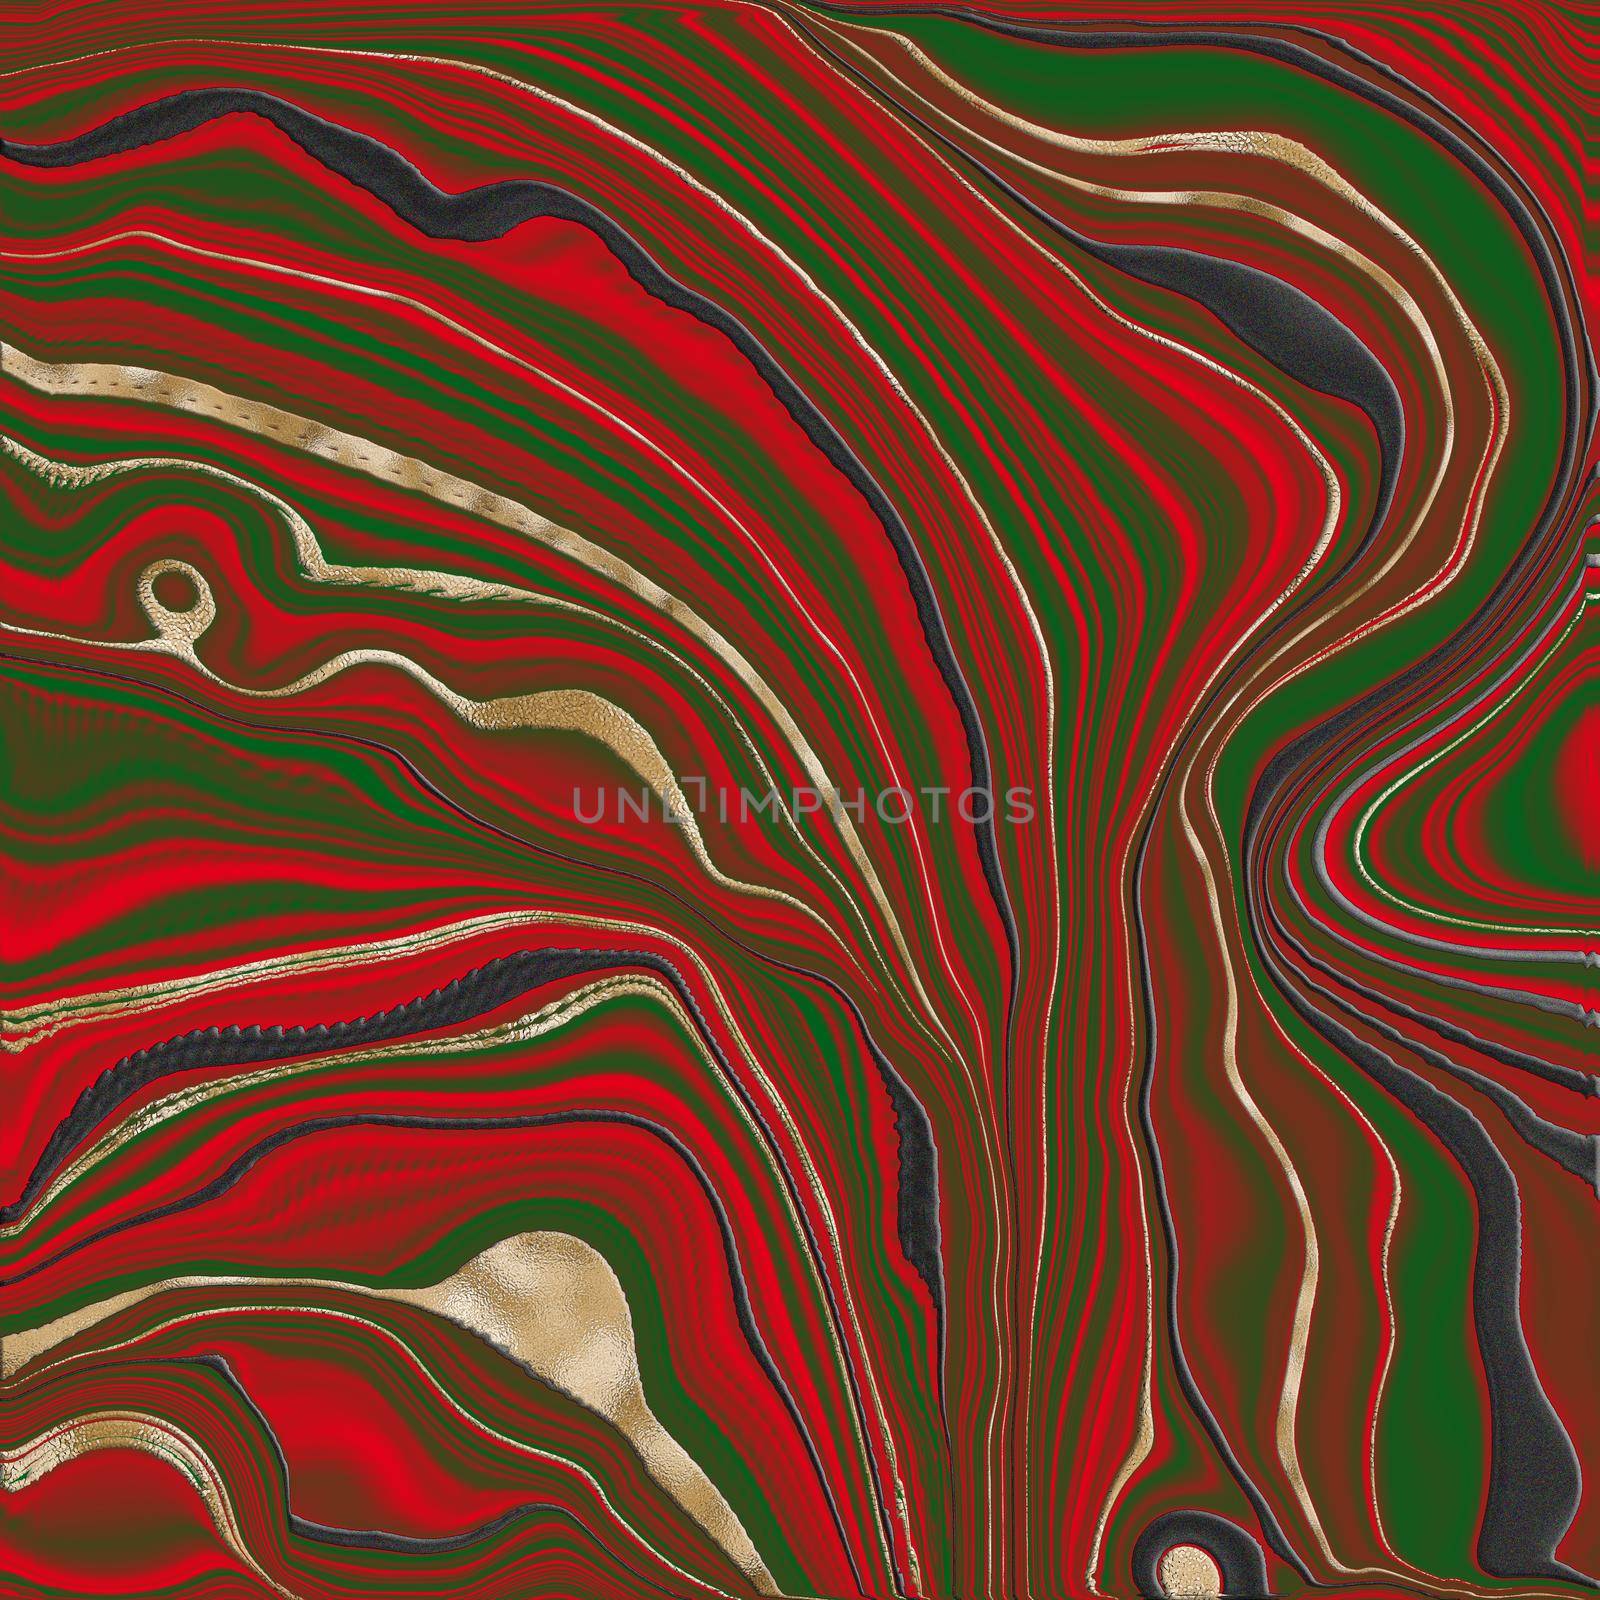 Fluid marbling effect in red with gold veins by NelliPolk